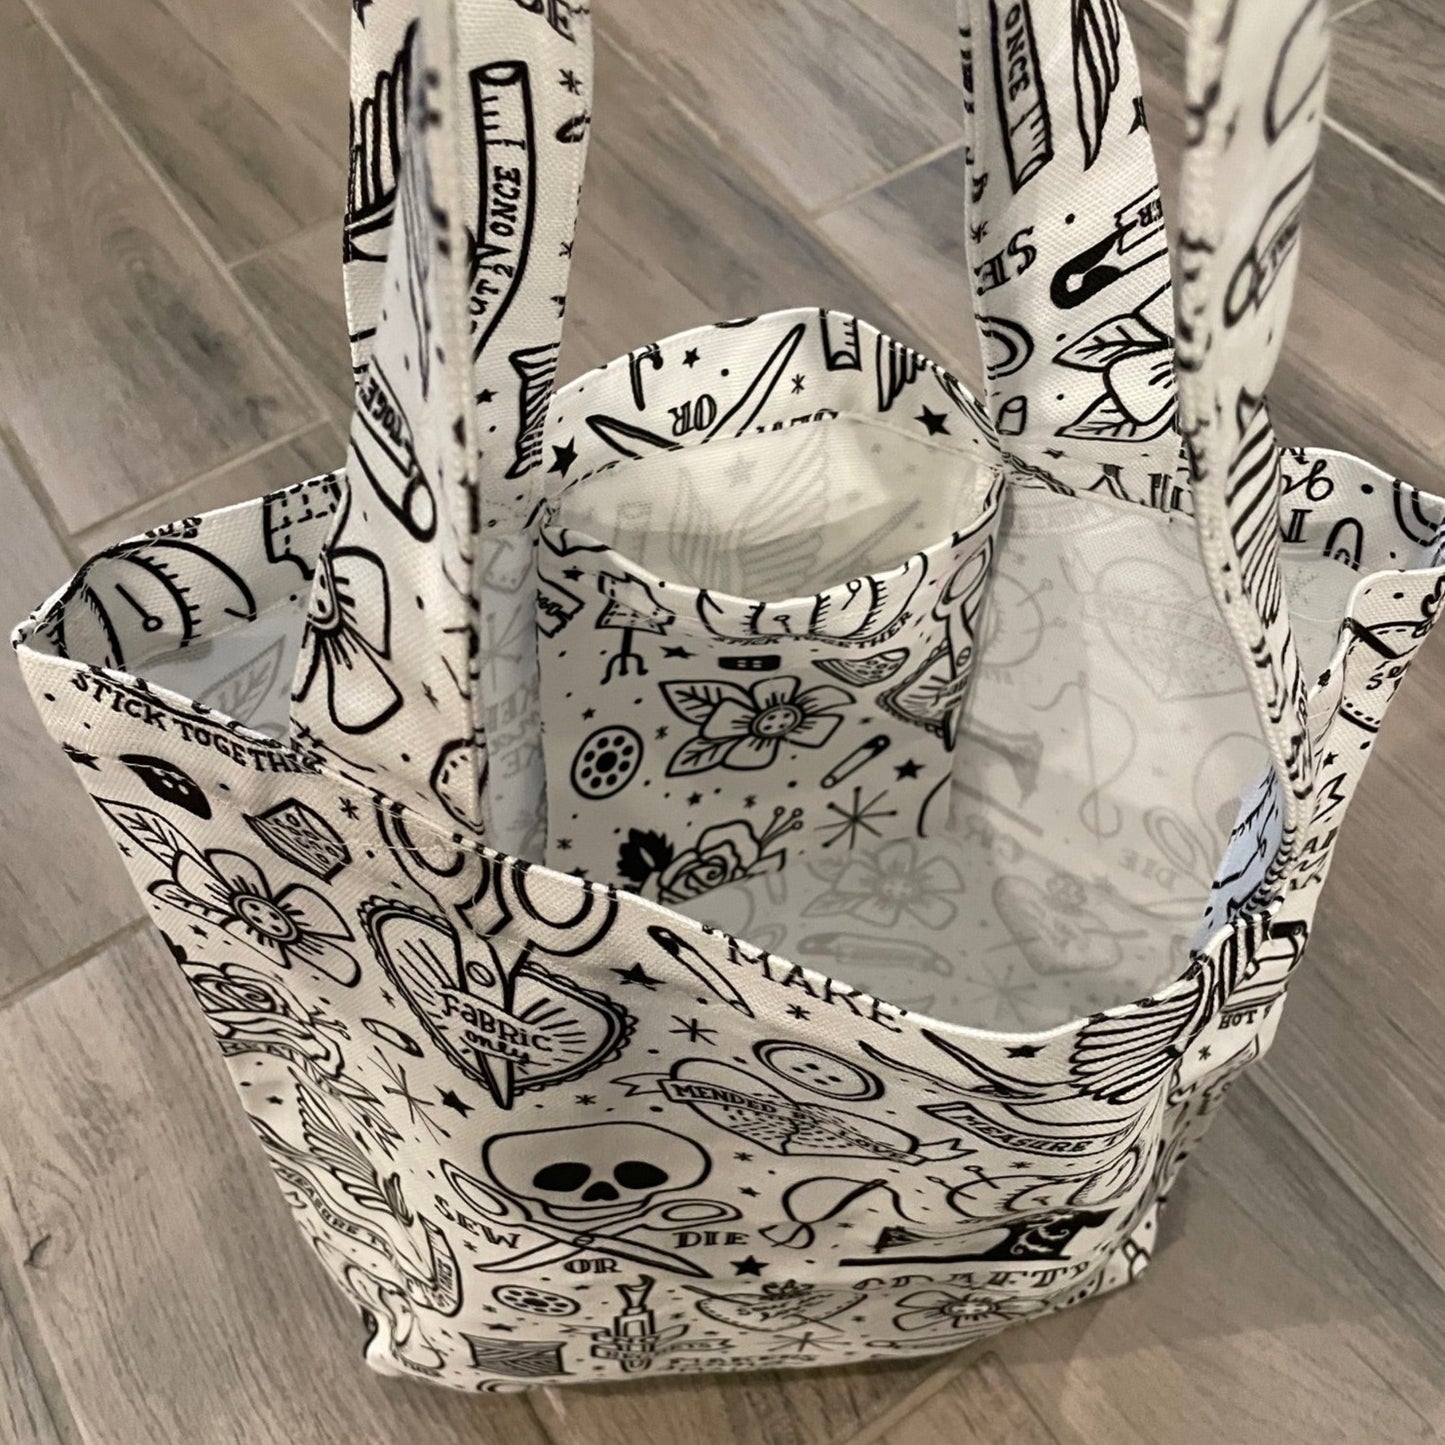 Project Tote Bag - Sew or Die in White